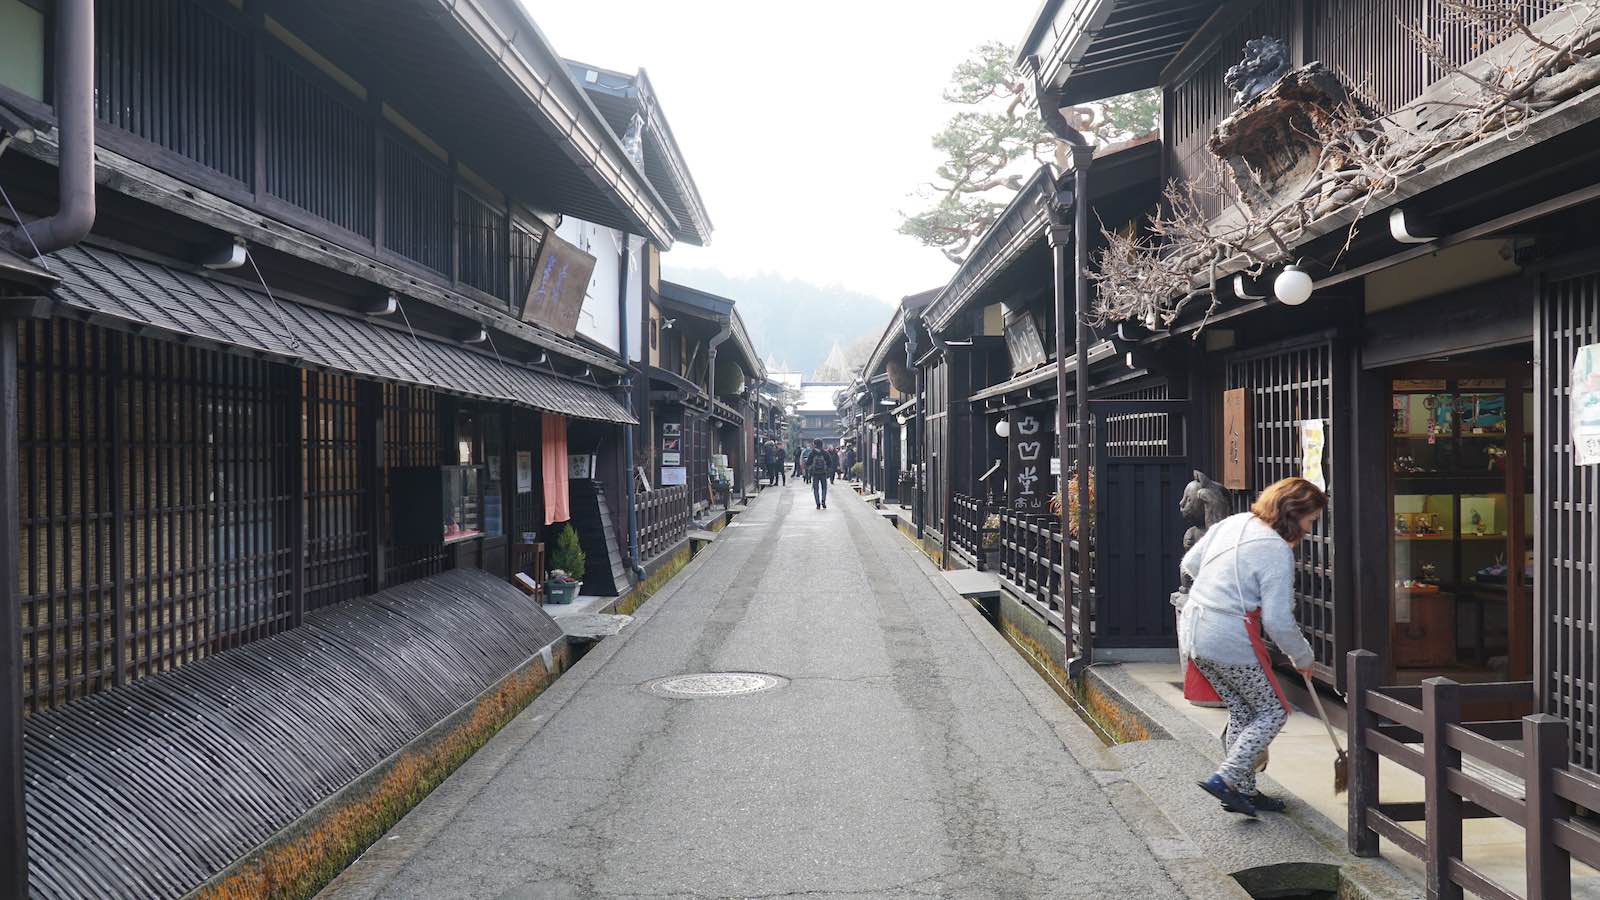 There's not much going on in the city proper (most people come here to take a bus to a nearby touristy UNESCO village site called Shirakawa-go, but I didn't feel like going there). Found an area of town where they preserved the buildings from hundreds of years ago.